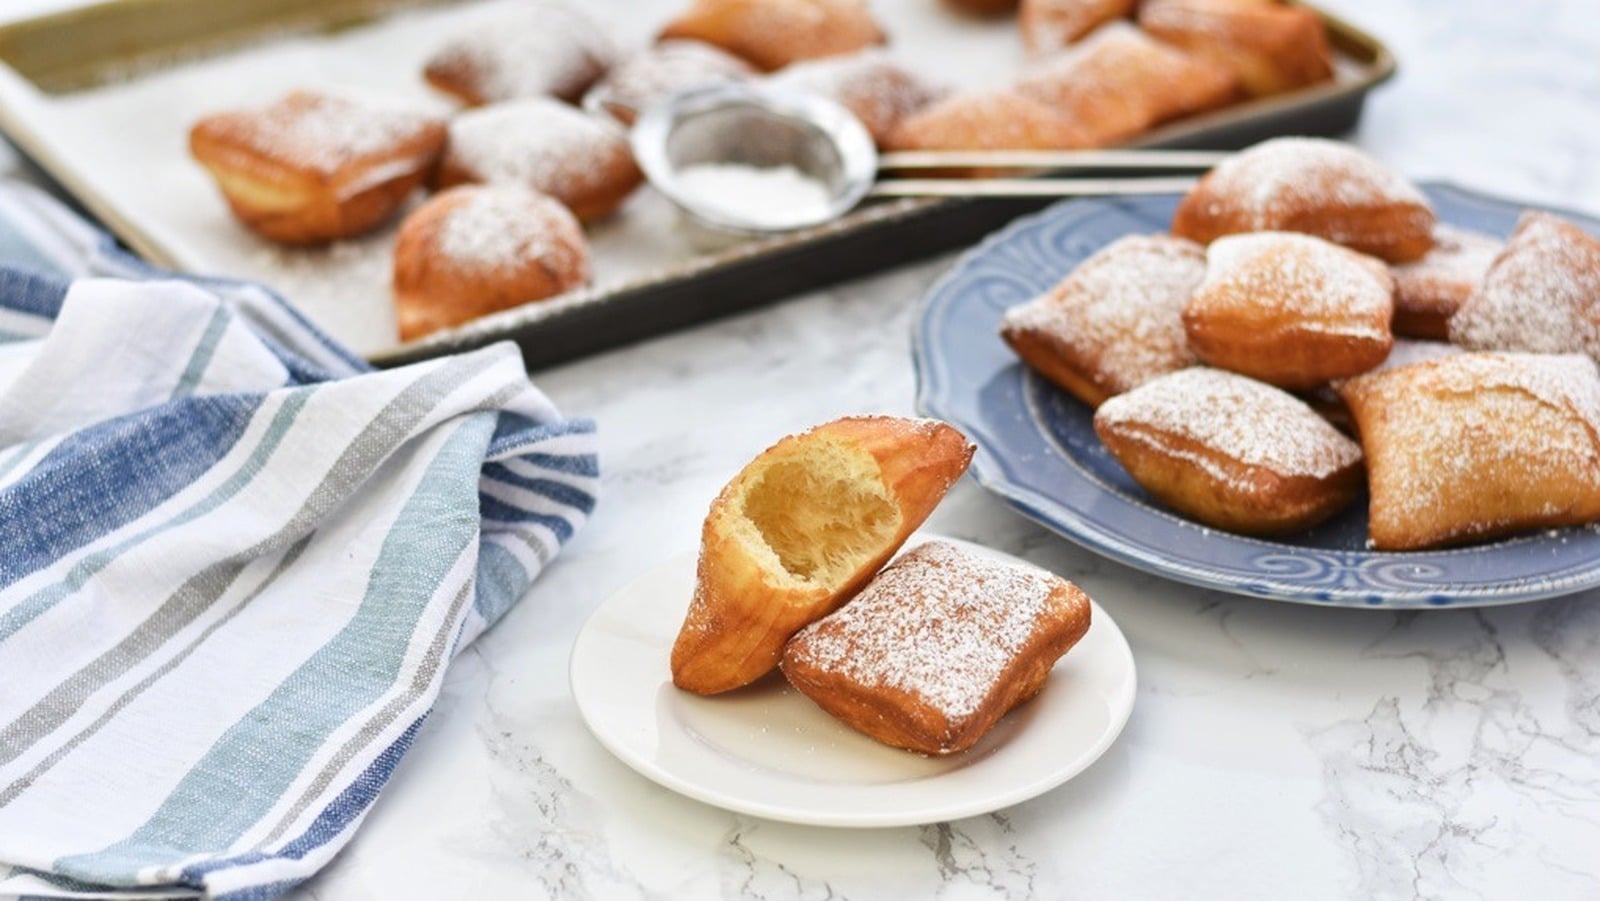 How to store leftover beignets